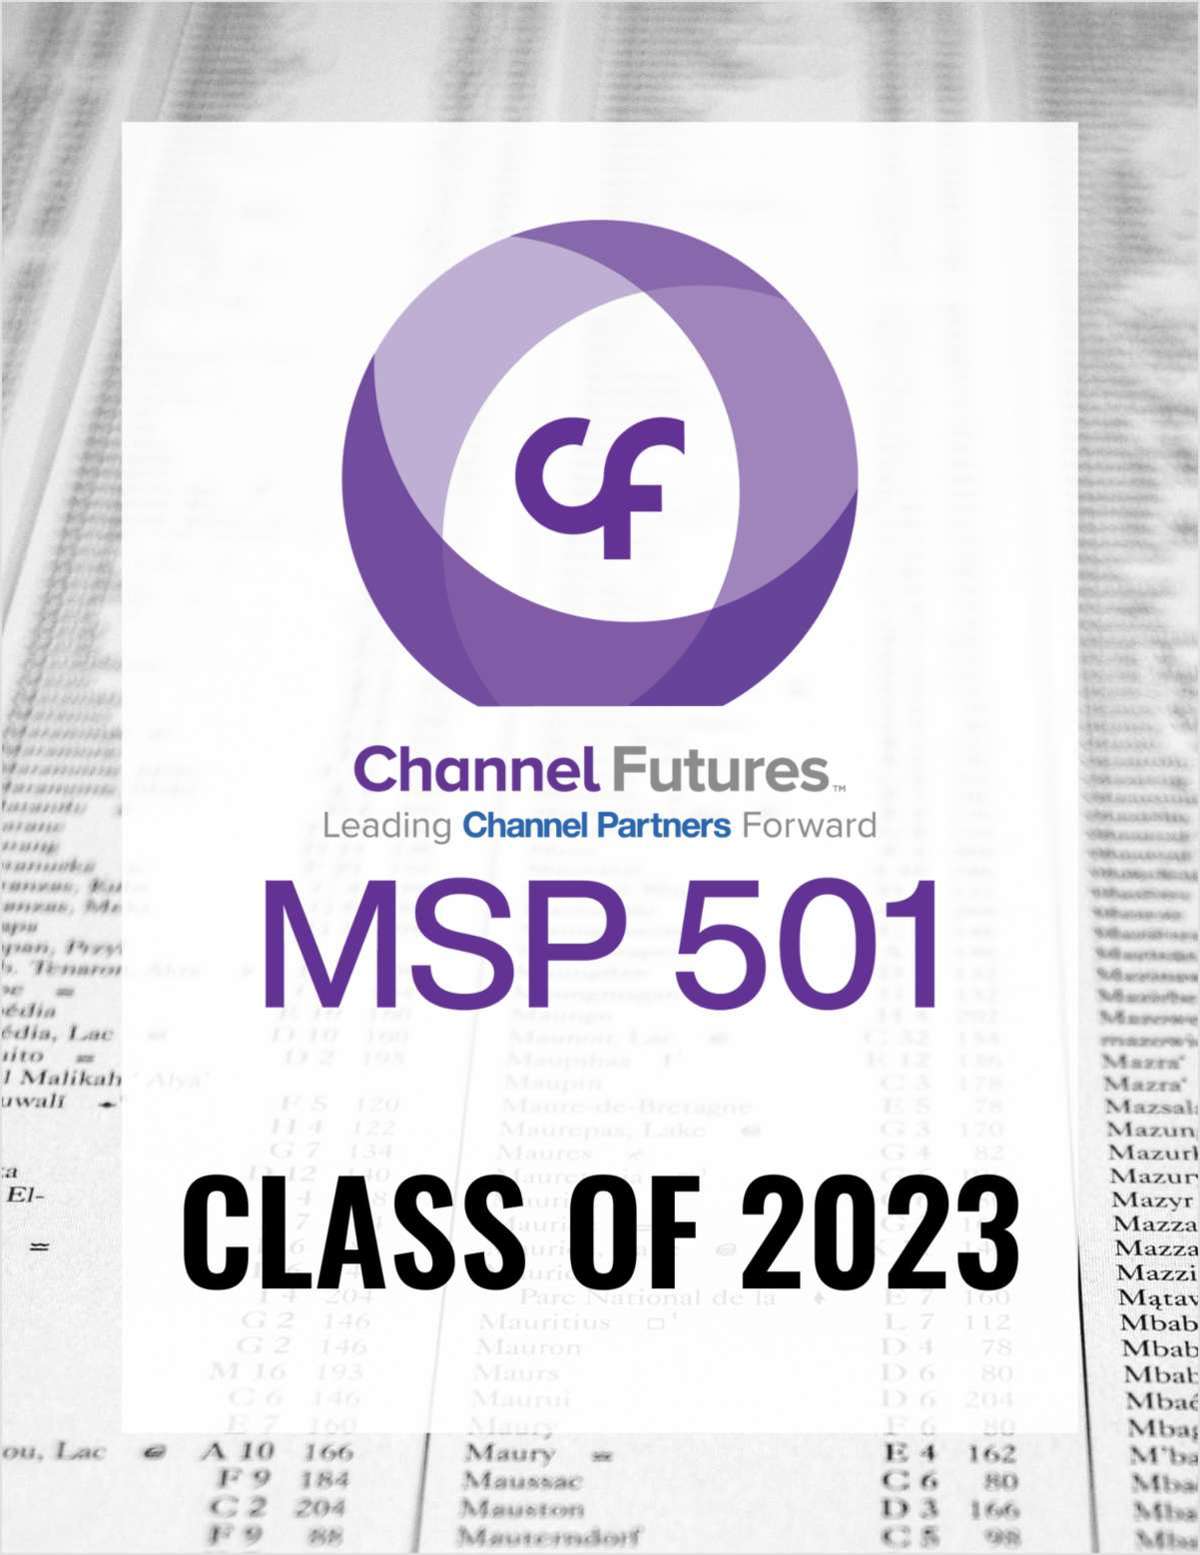 Top Managed Service Providers for 2023 - Channel Futures MSP 501